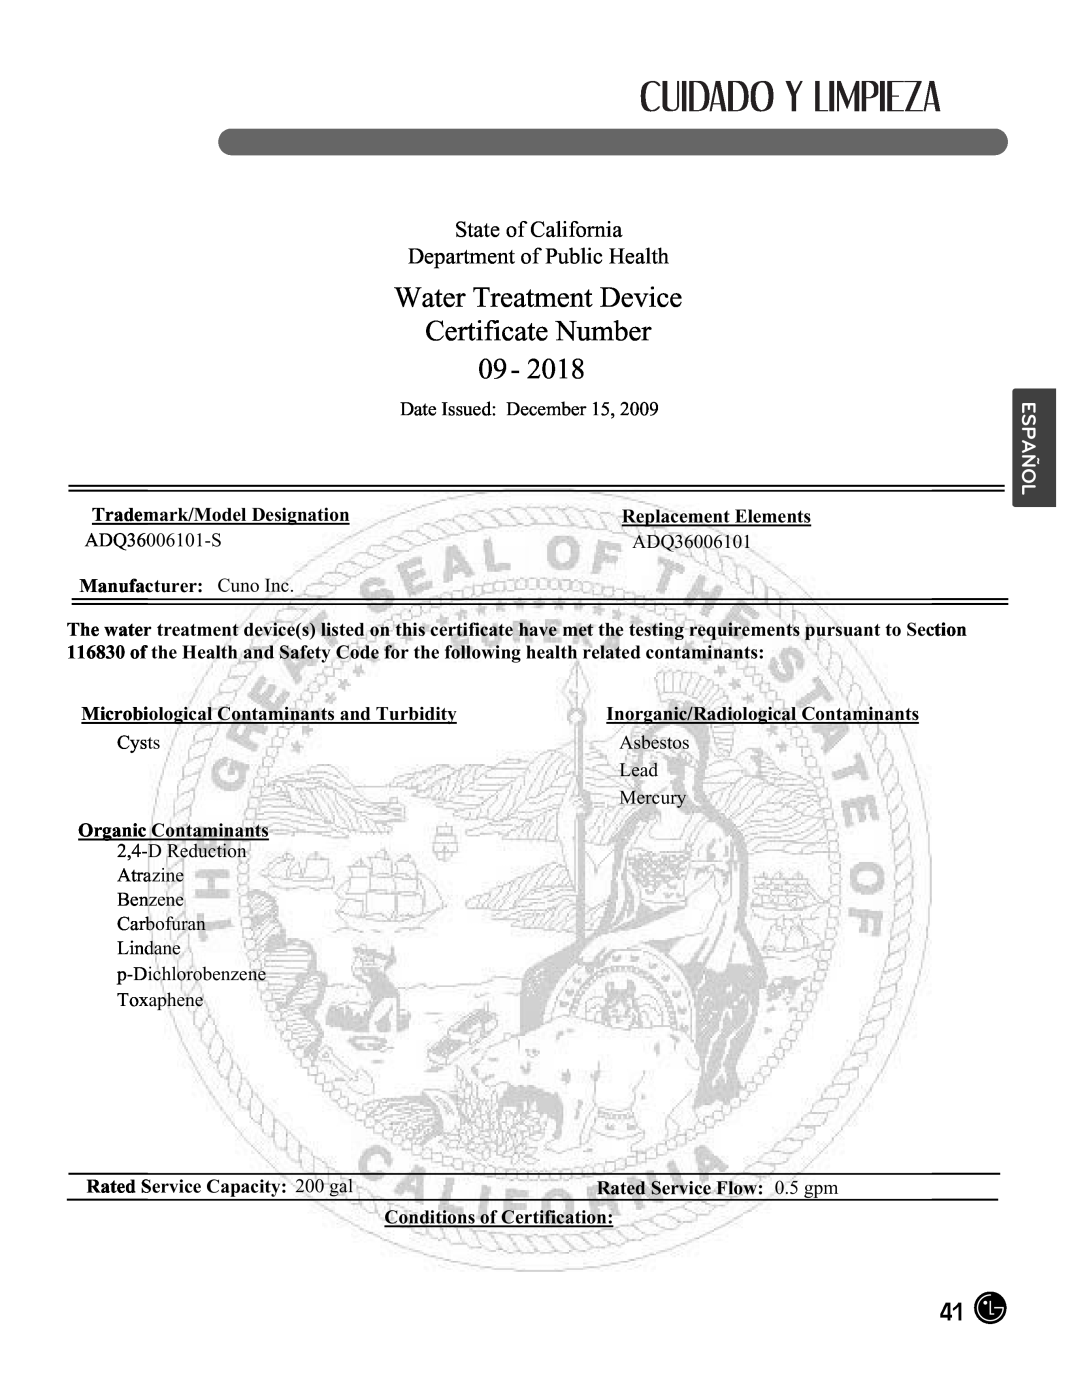 LG Electronics LMX25988ST Water Treatment Device Certificate Number, State of California Department of Public Health 